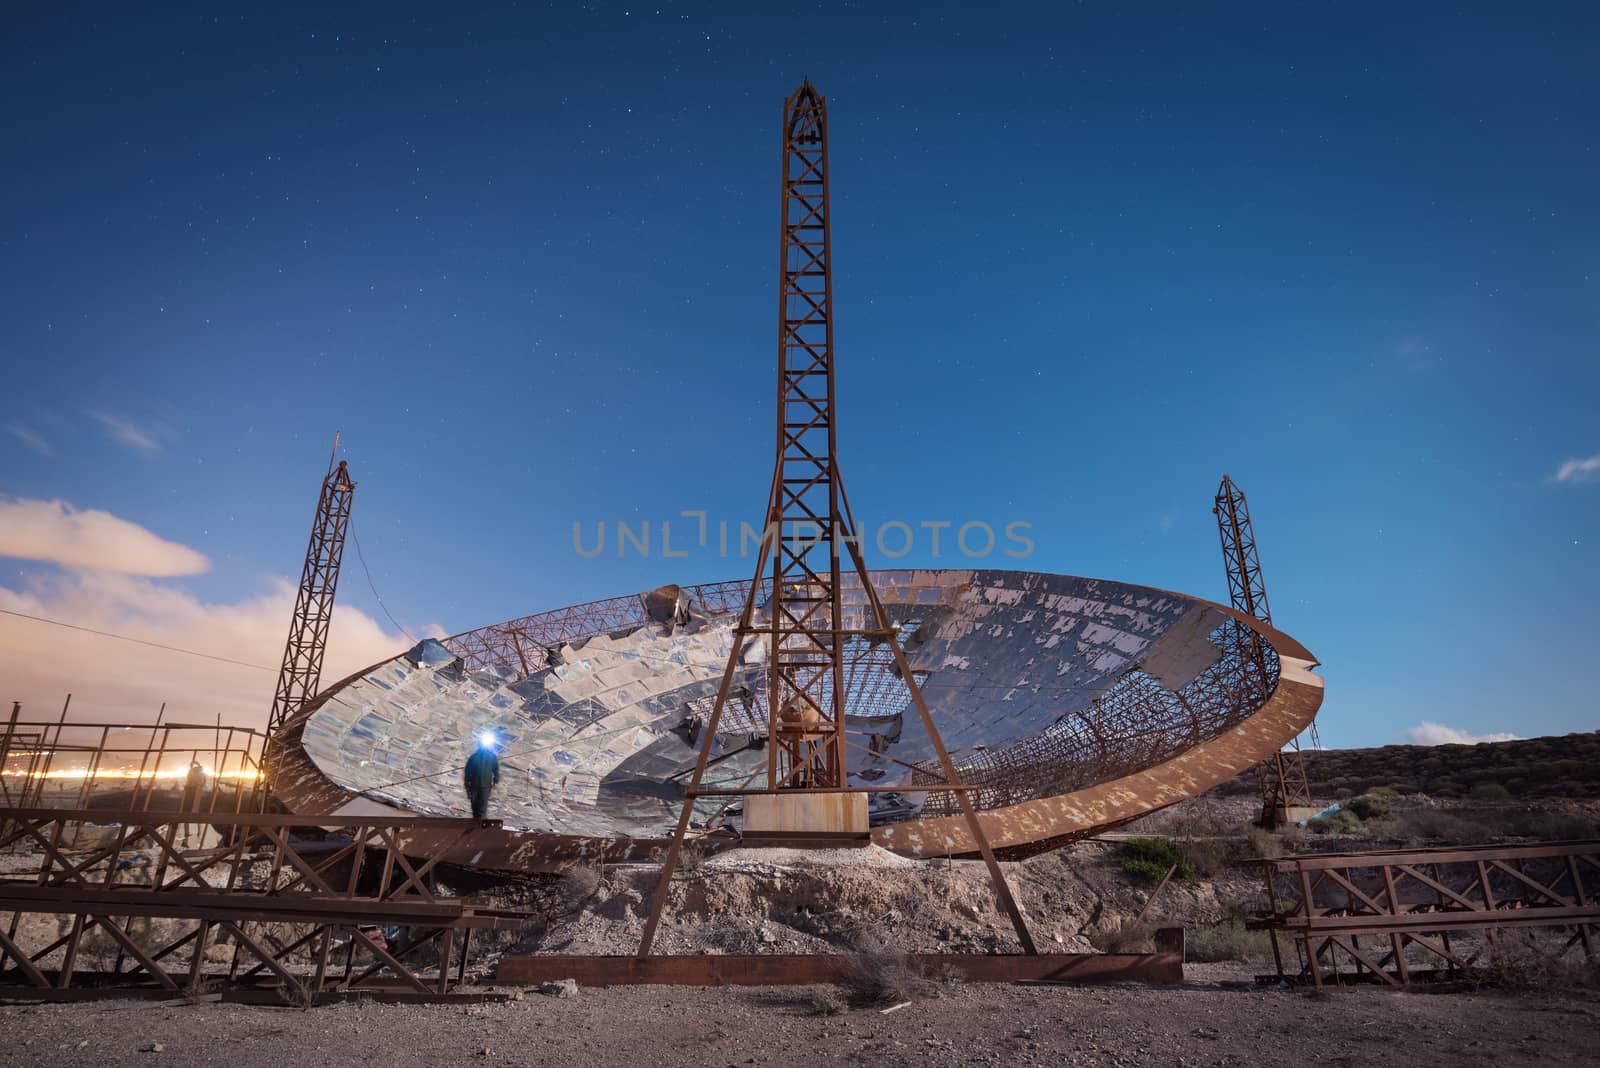 Nigth photography of a ruined setellite dish antenna by HERRAEZ